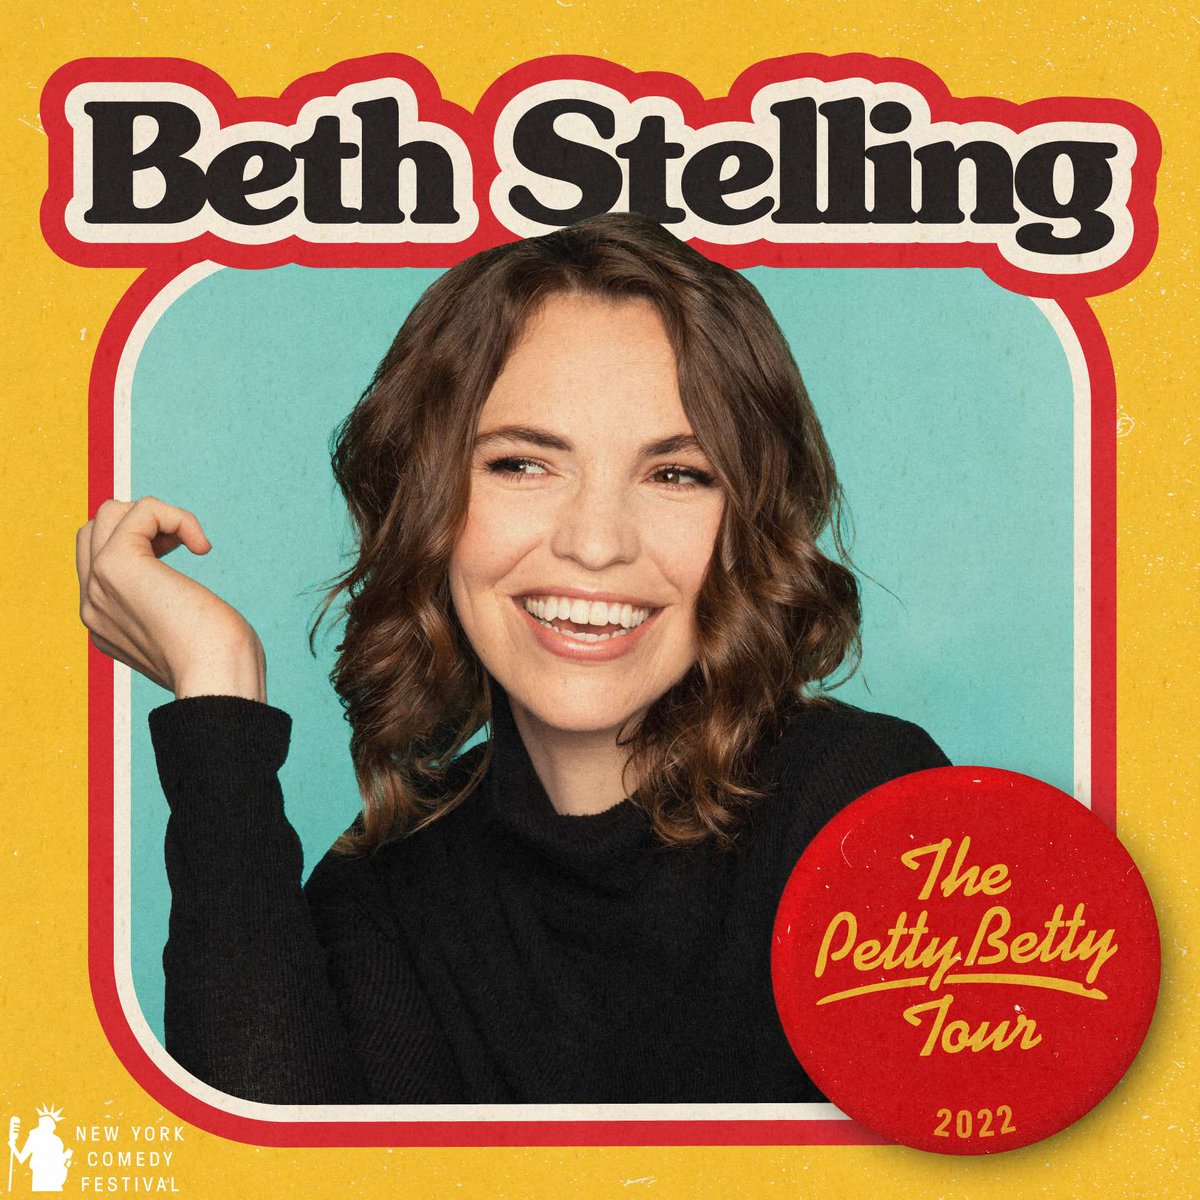 Next Friday 11/11, @BethStelling brings The Petty Betty Tour to The Bell House as part of the @nycomedyfest! Tickets & Details: bit.ly/3N2d314